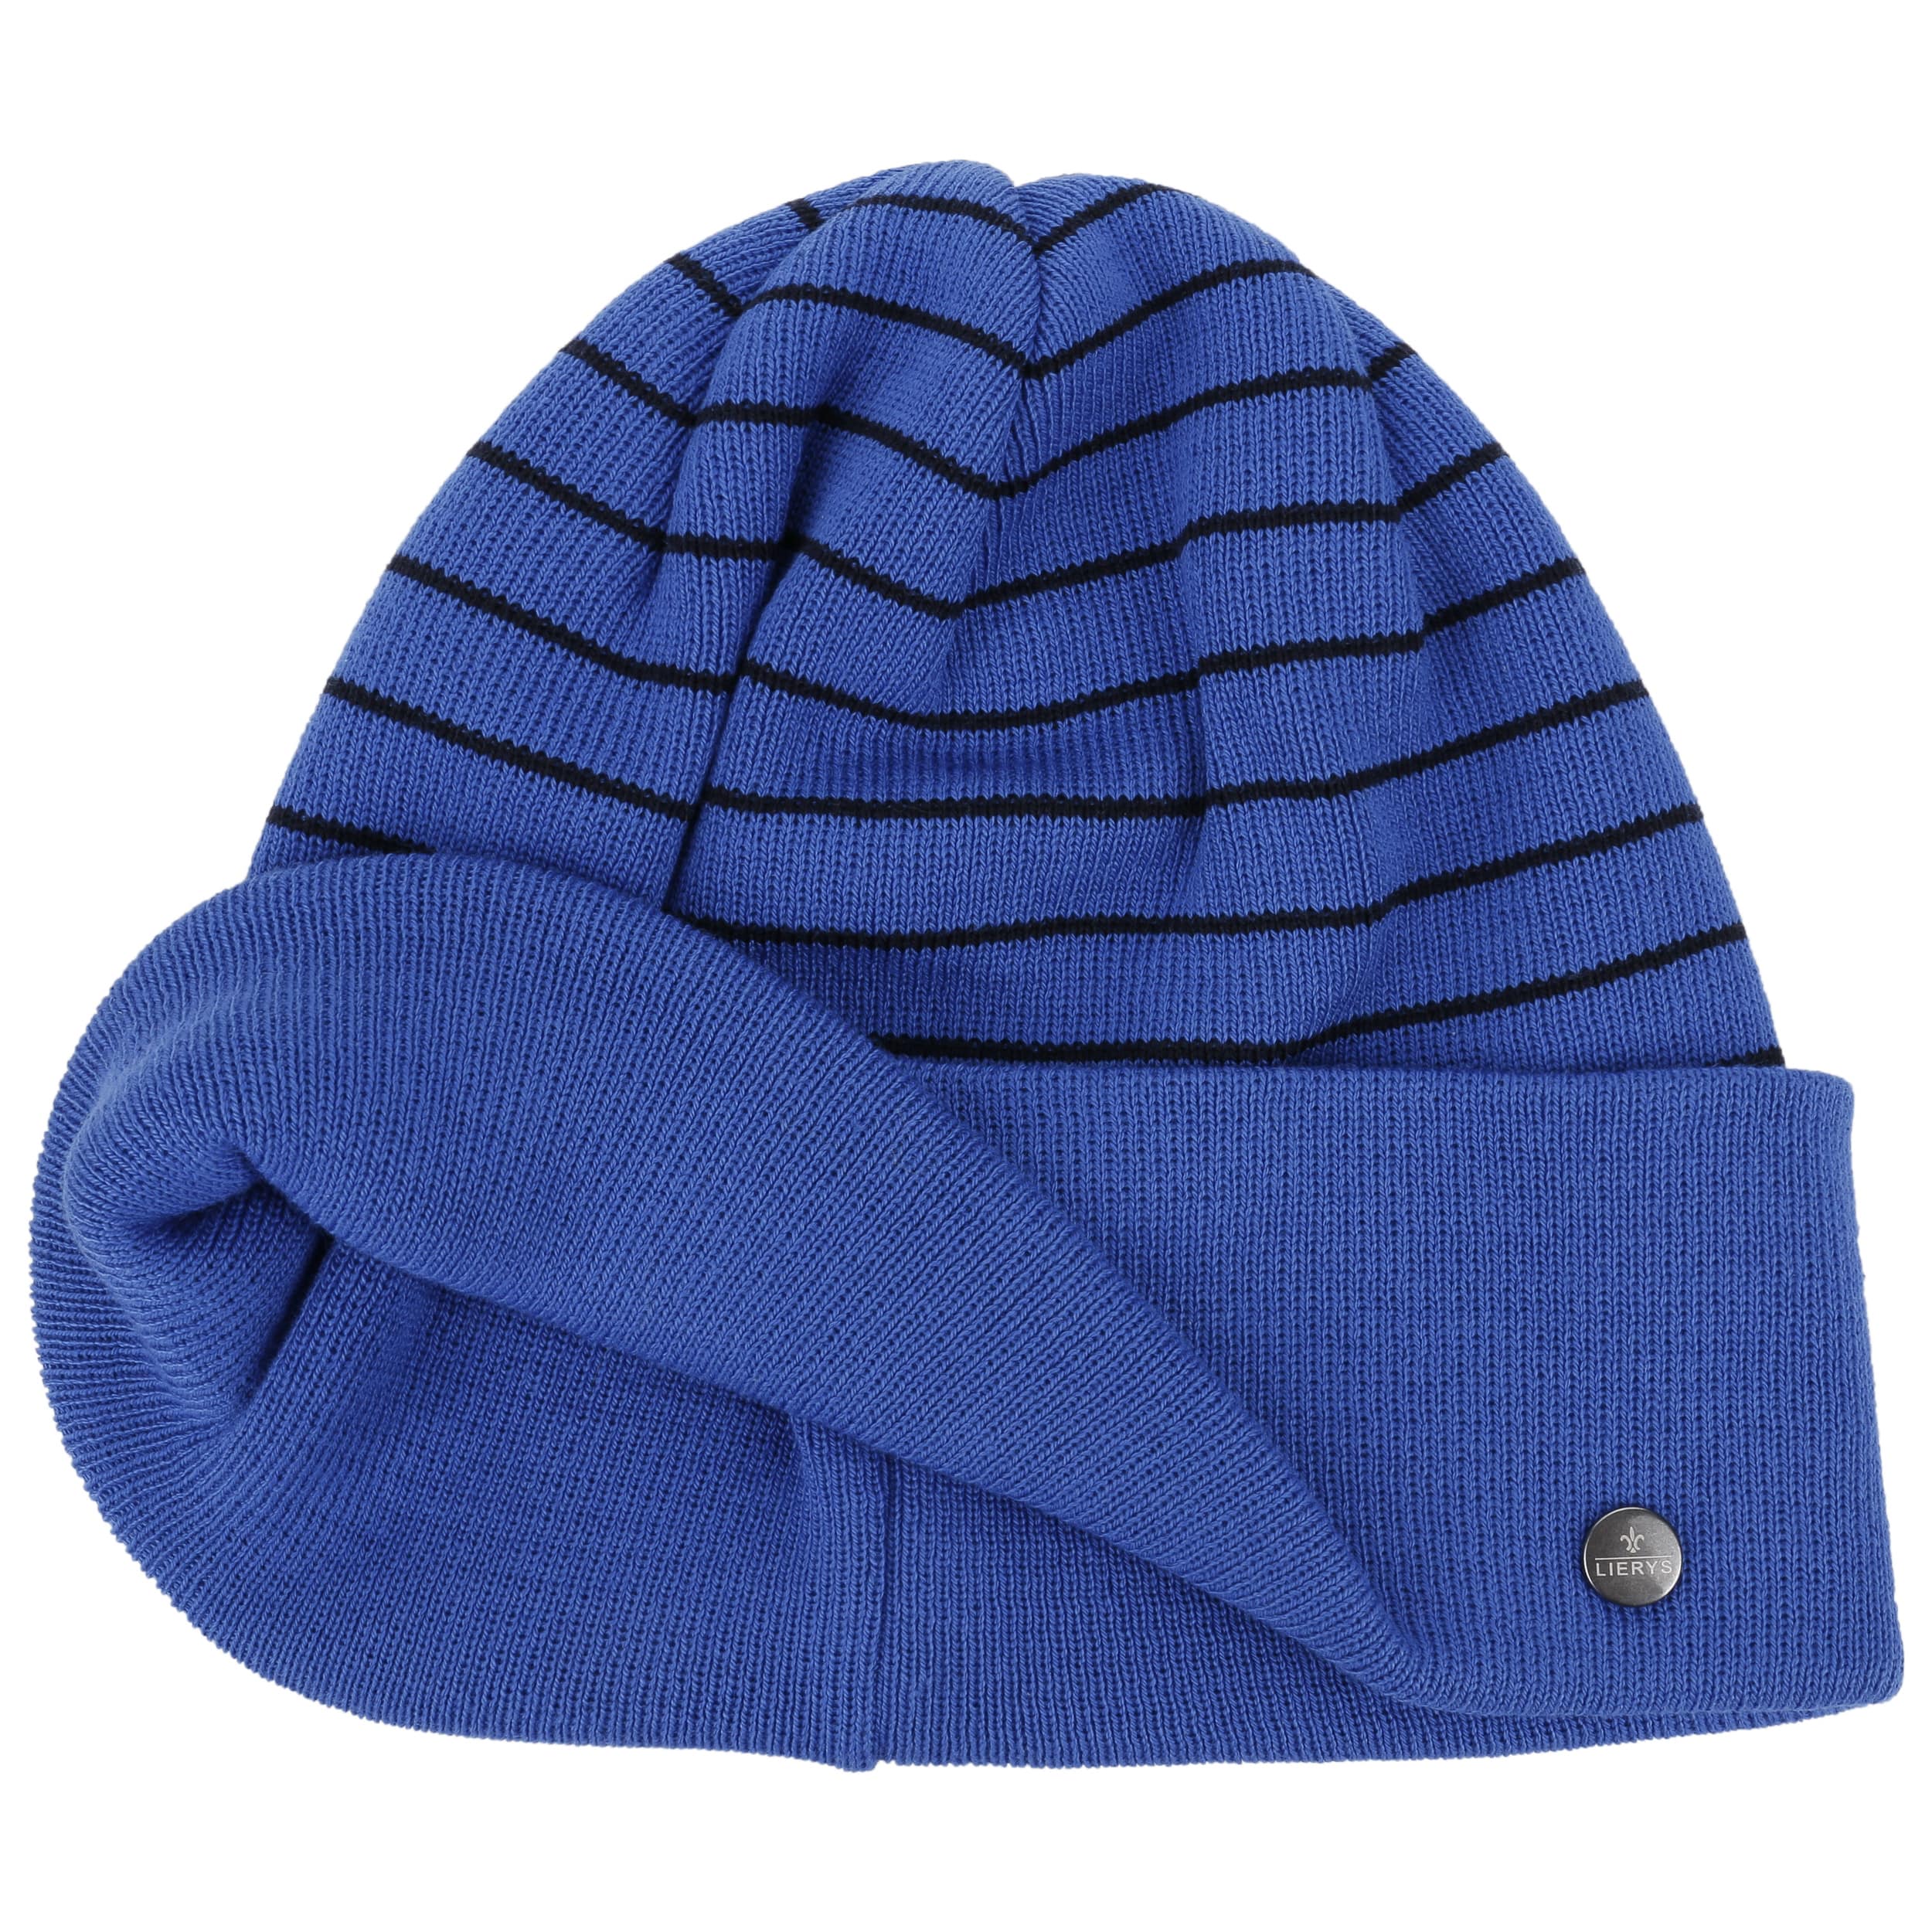 Organic Cotton Beanie with Cuff by Lierys --> Shop Hats, Beanies